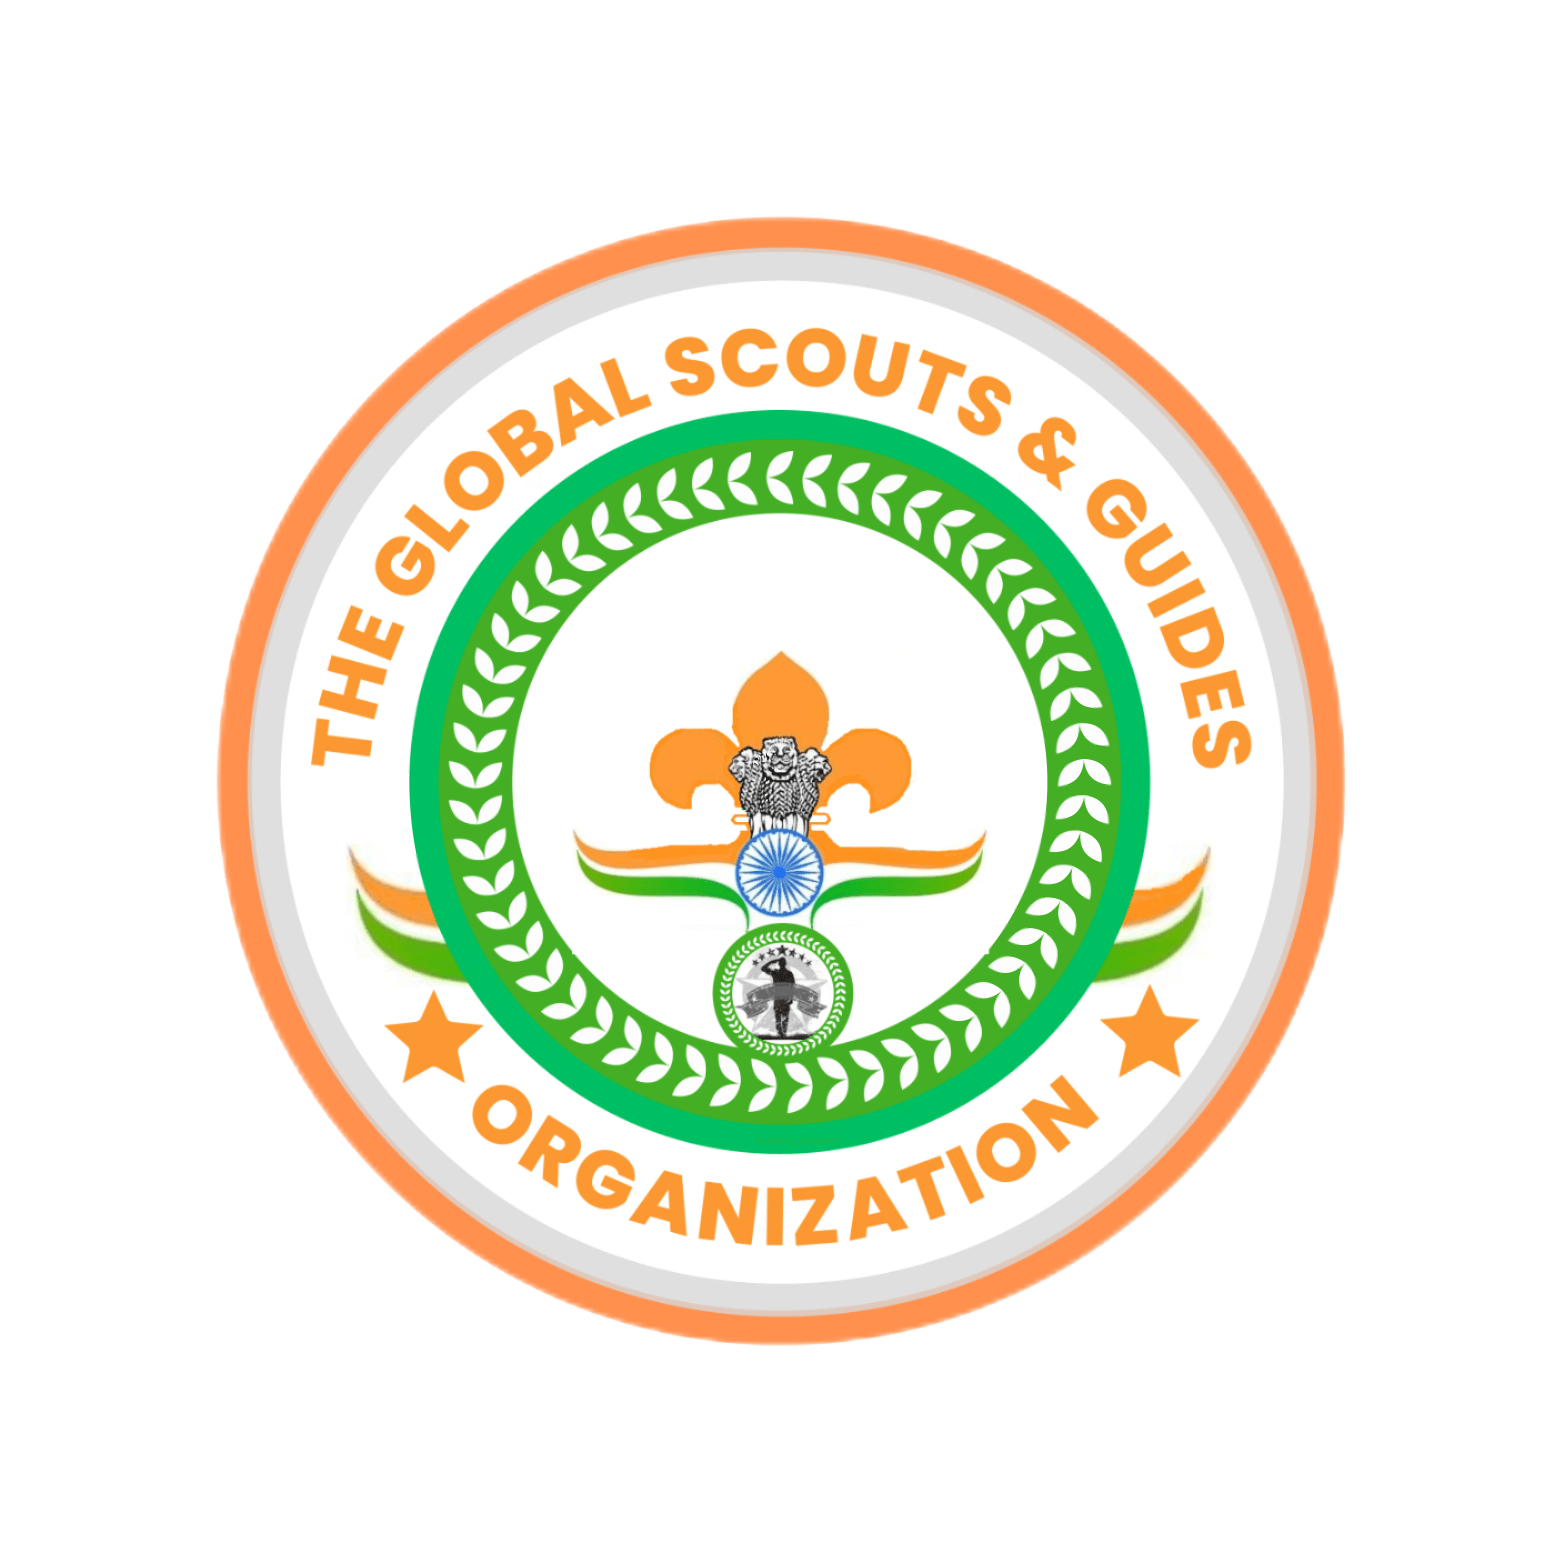 The History of Scouting in INDIA | scouting